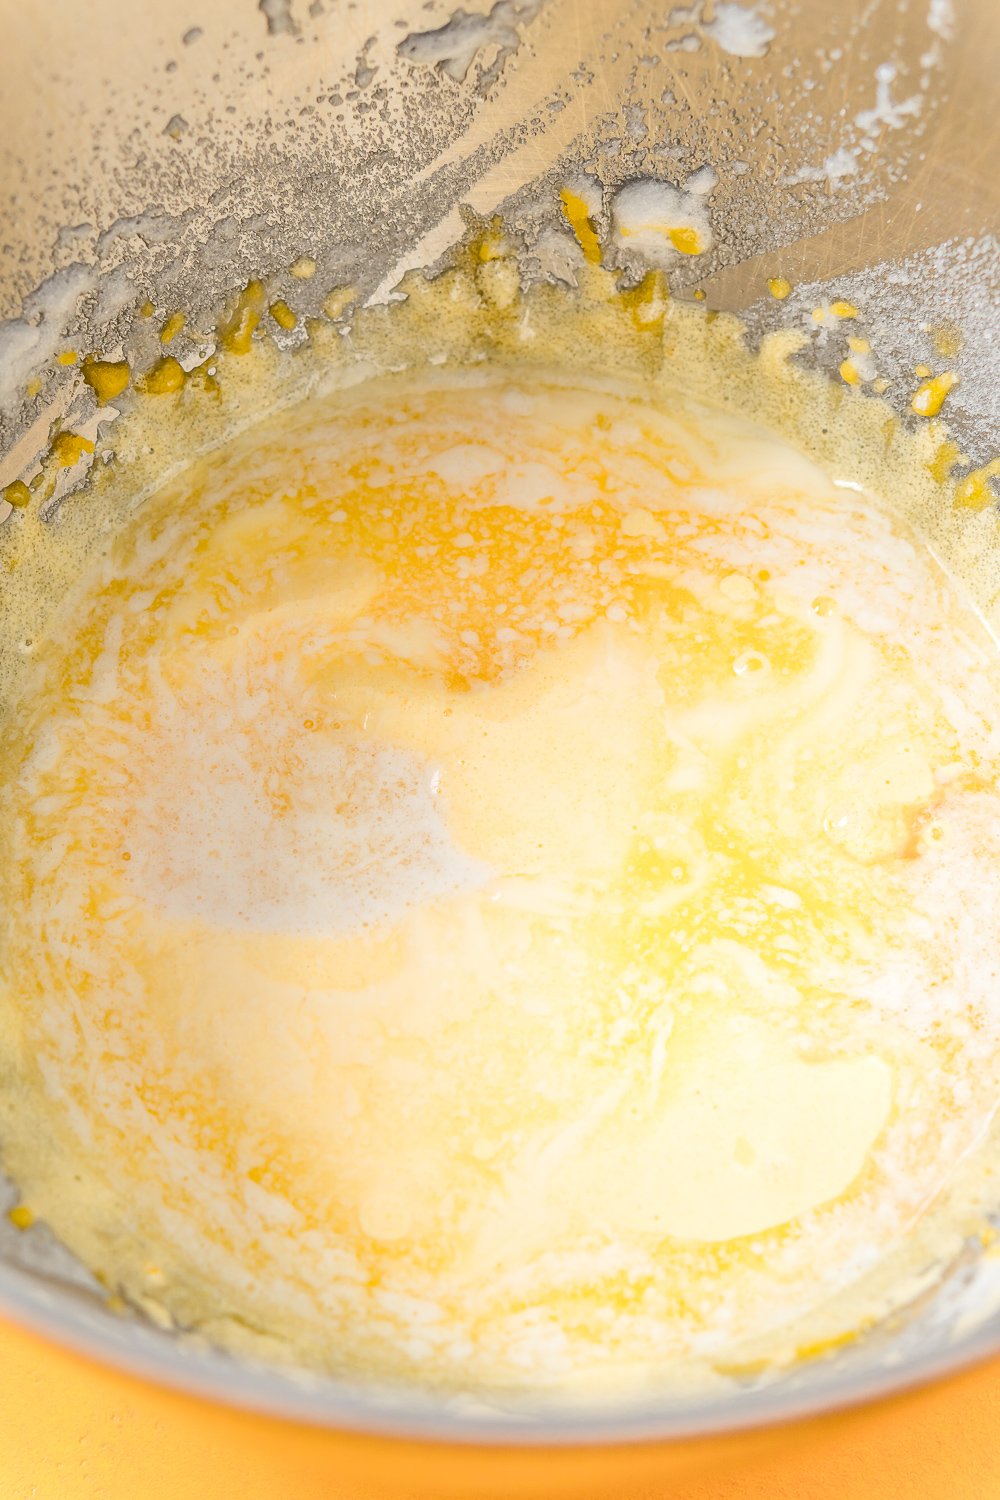 Melted butter being added to lemon cake batter in metal mixing bowl.